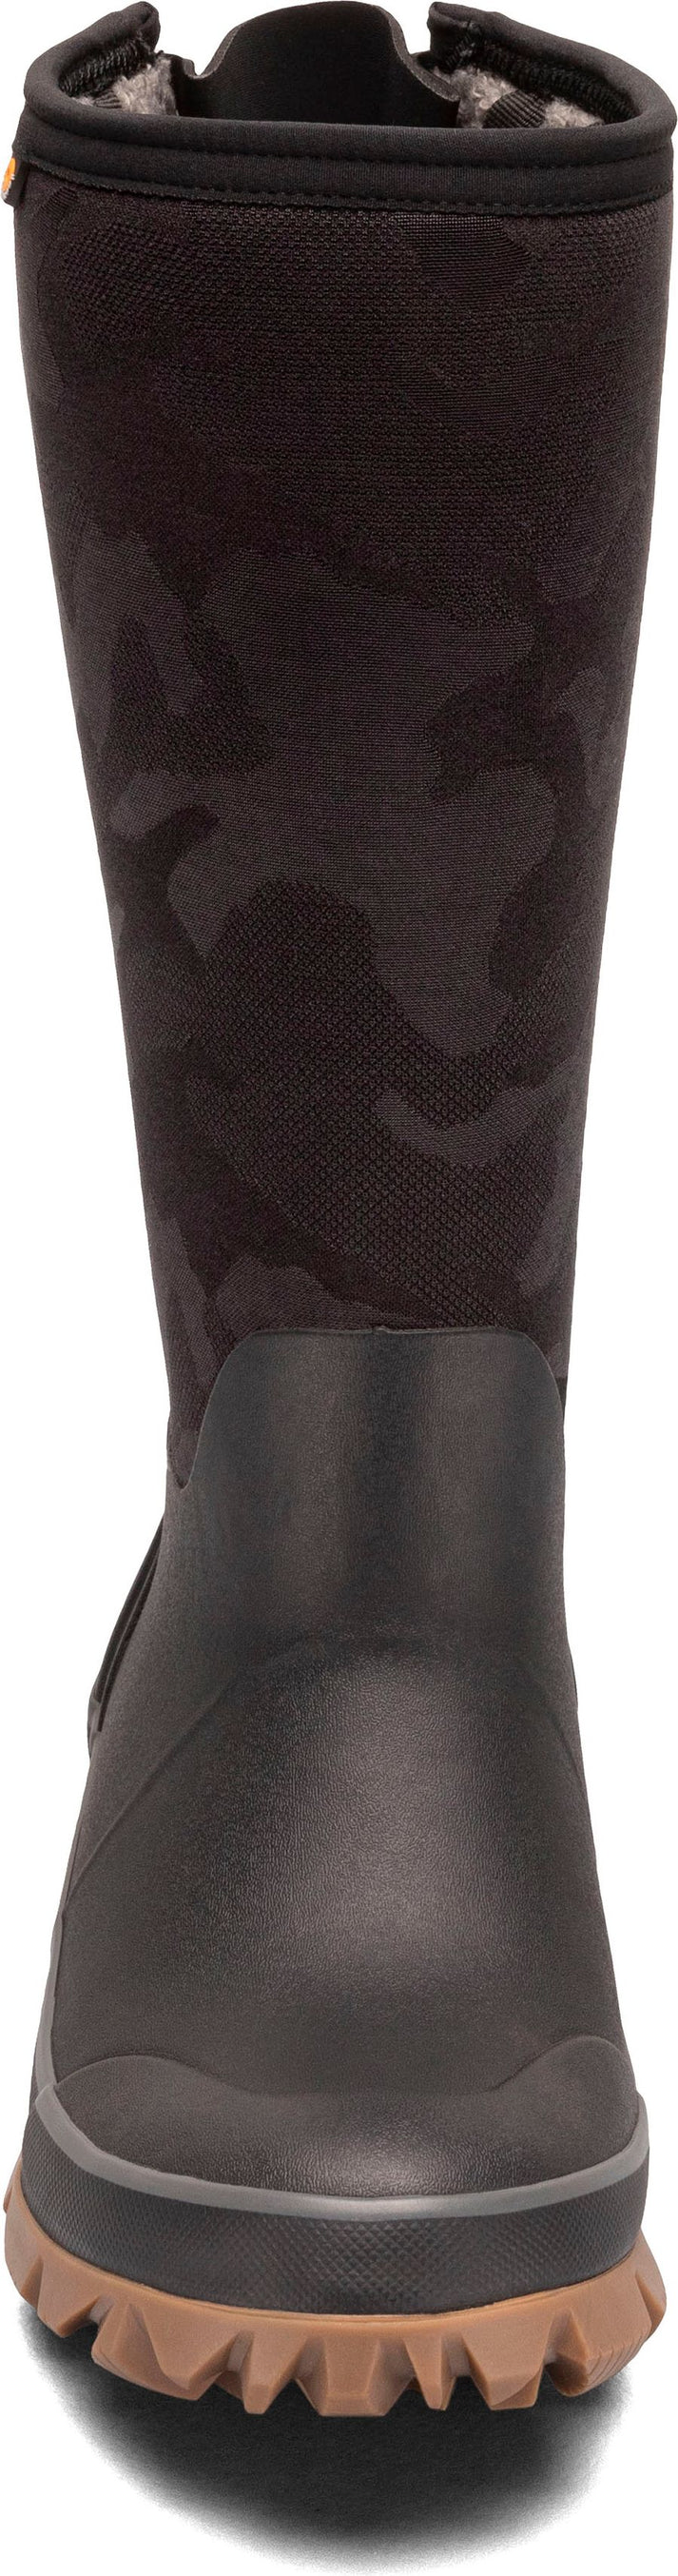 BOGS Boots Whiteout Adjustable Calf Camo Black